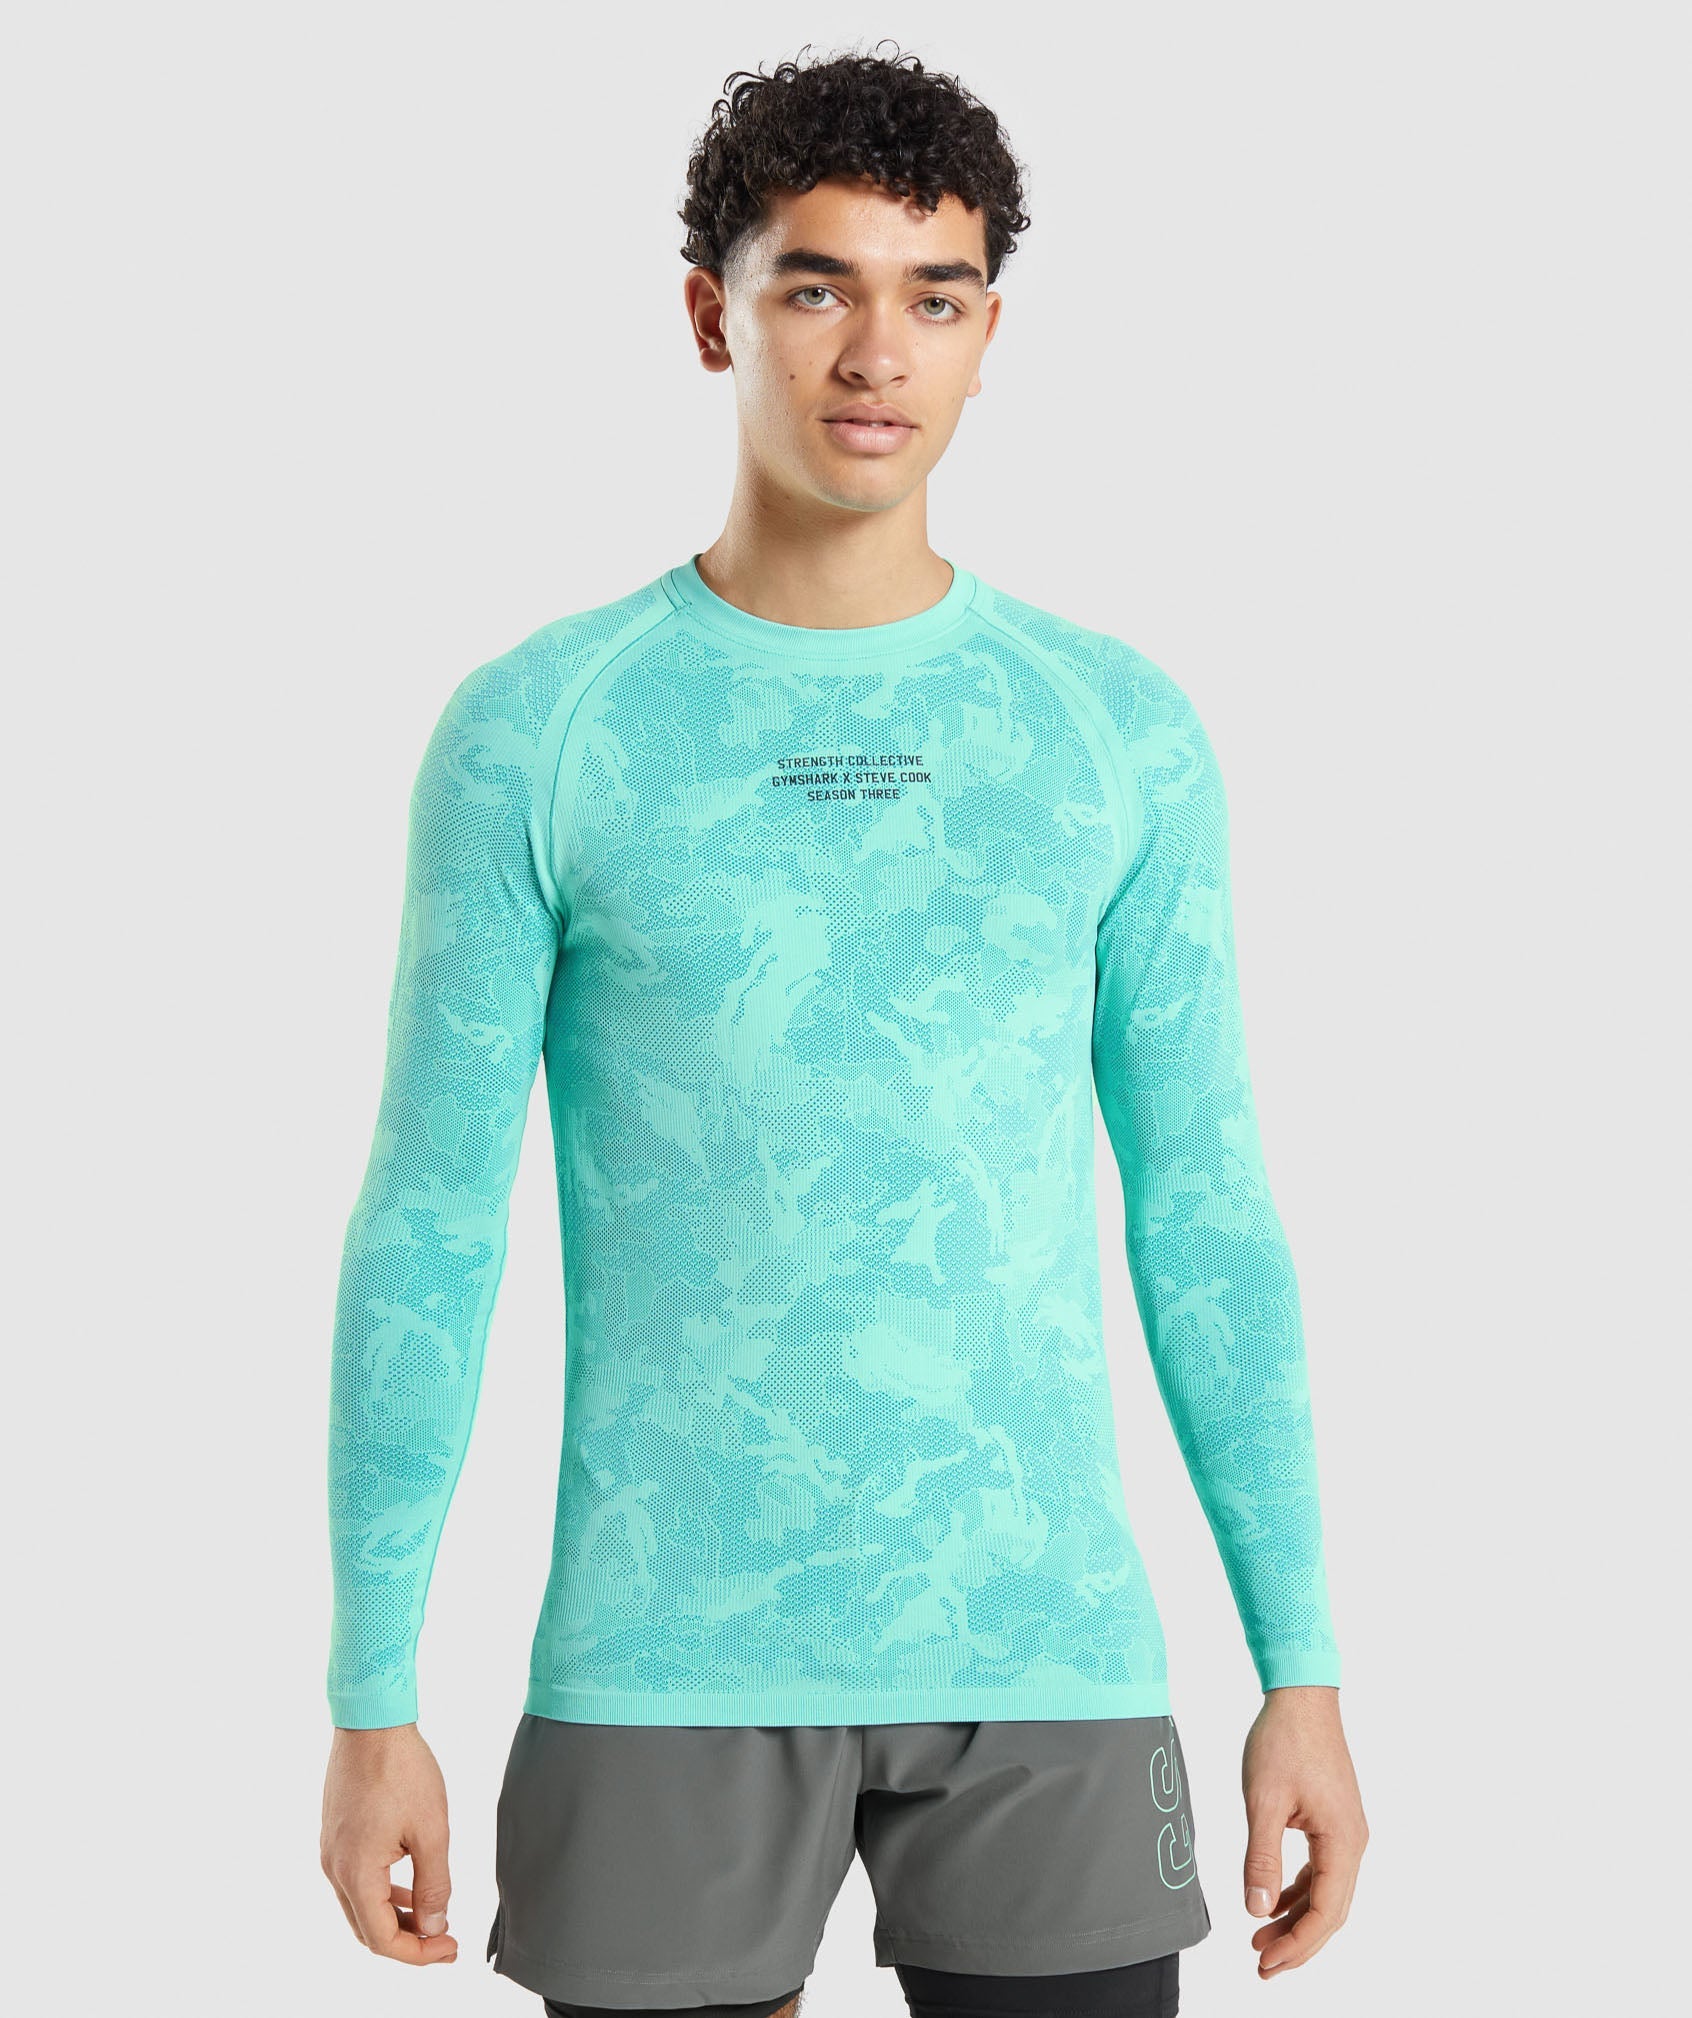 Gymshark//Steve Cook Long Sleeve Seamless T-Shirt in Bright Turquoise/Atlas Blue - view 2